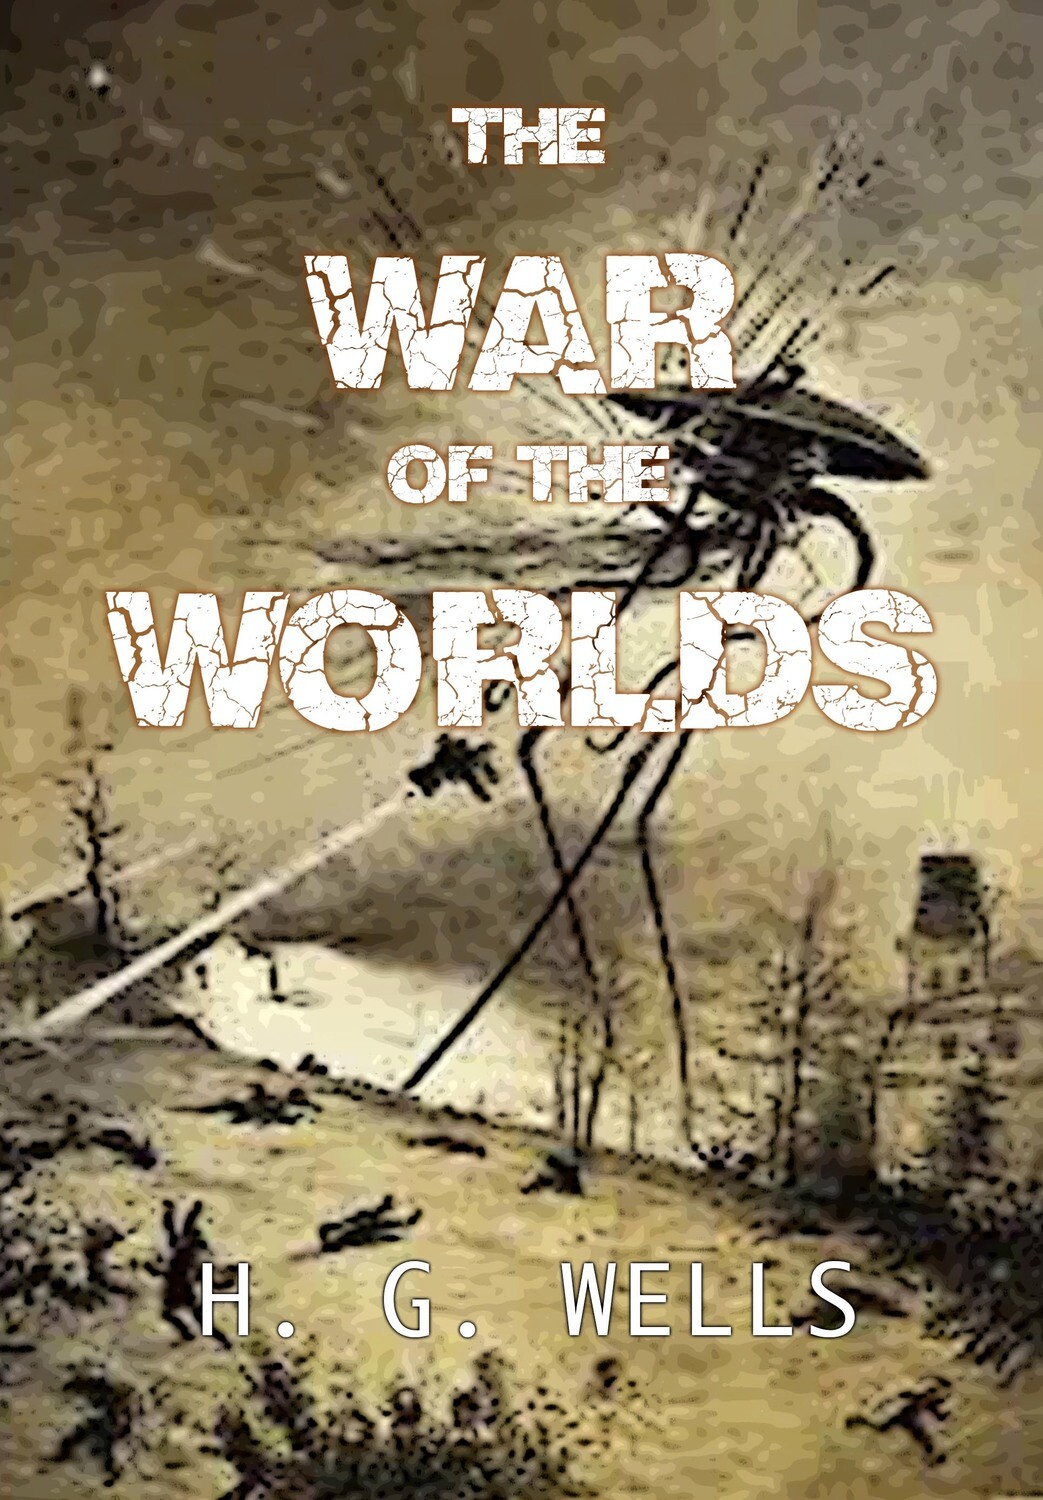 The War of the Worlds by H. G. Wells - Digital Book [INSTANT DIGITAL DOWNLOAD]